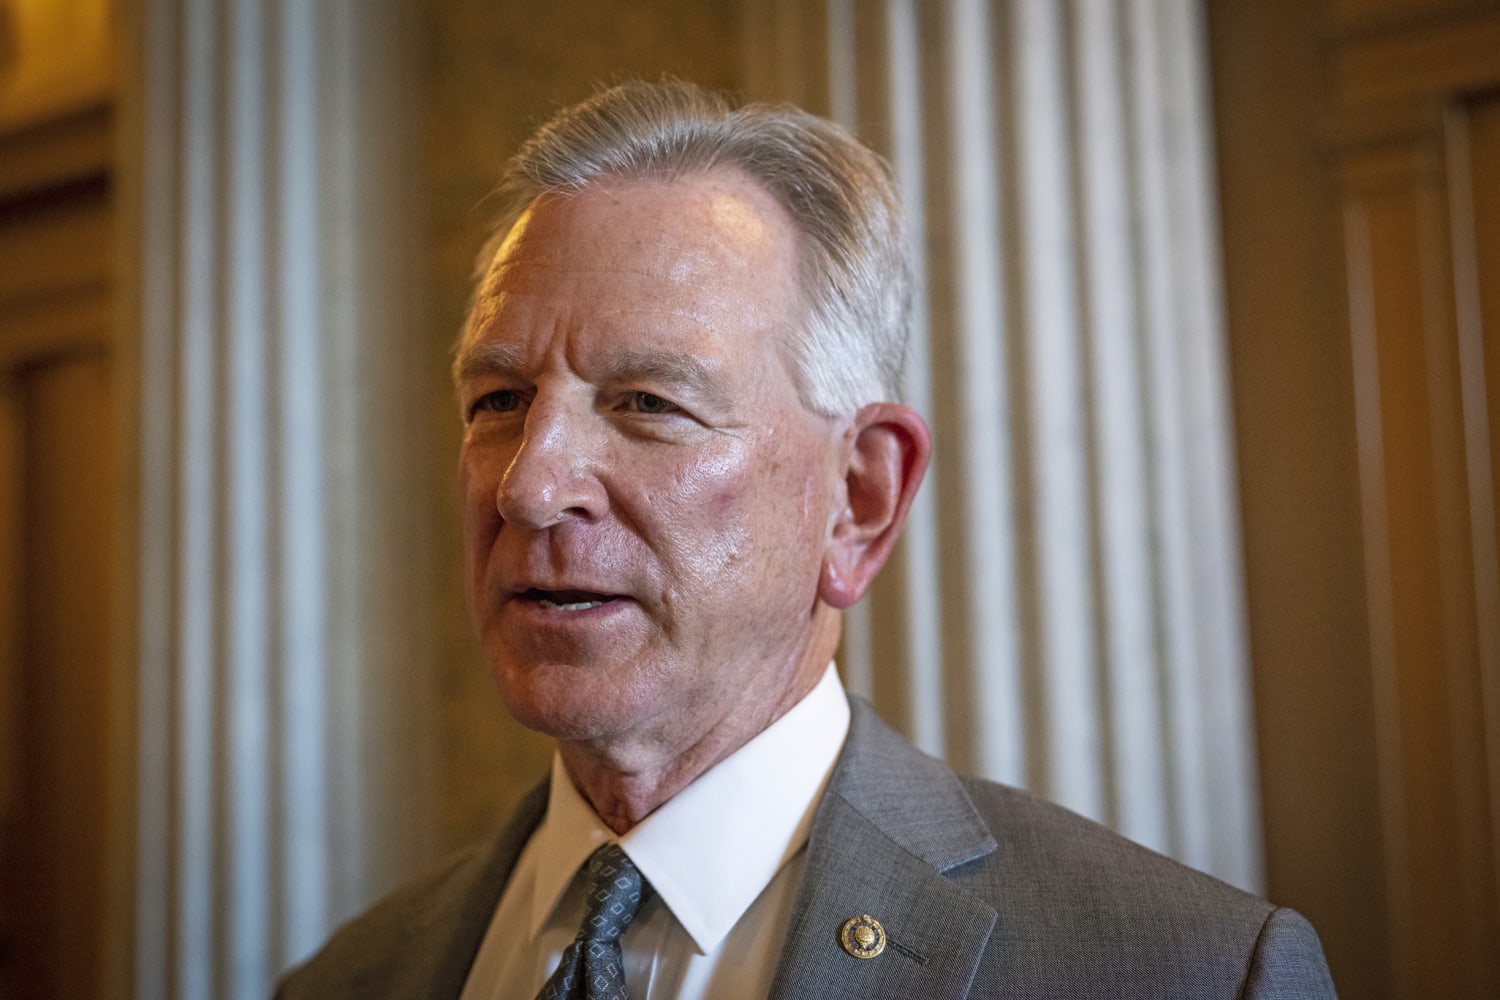 Schumer says he's open to giving Sen. Tuberville a vote on the military's abortion policy